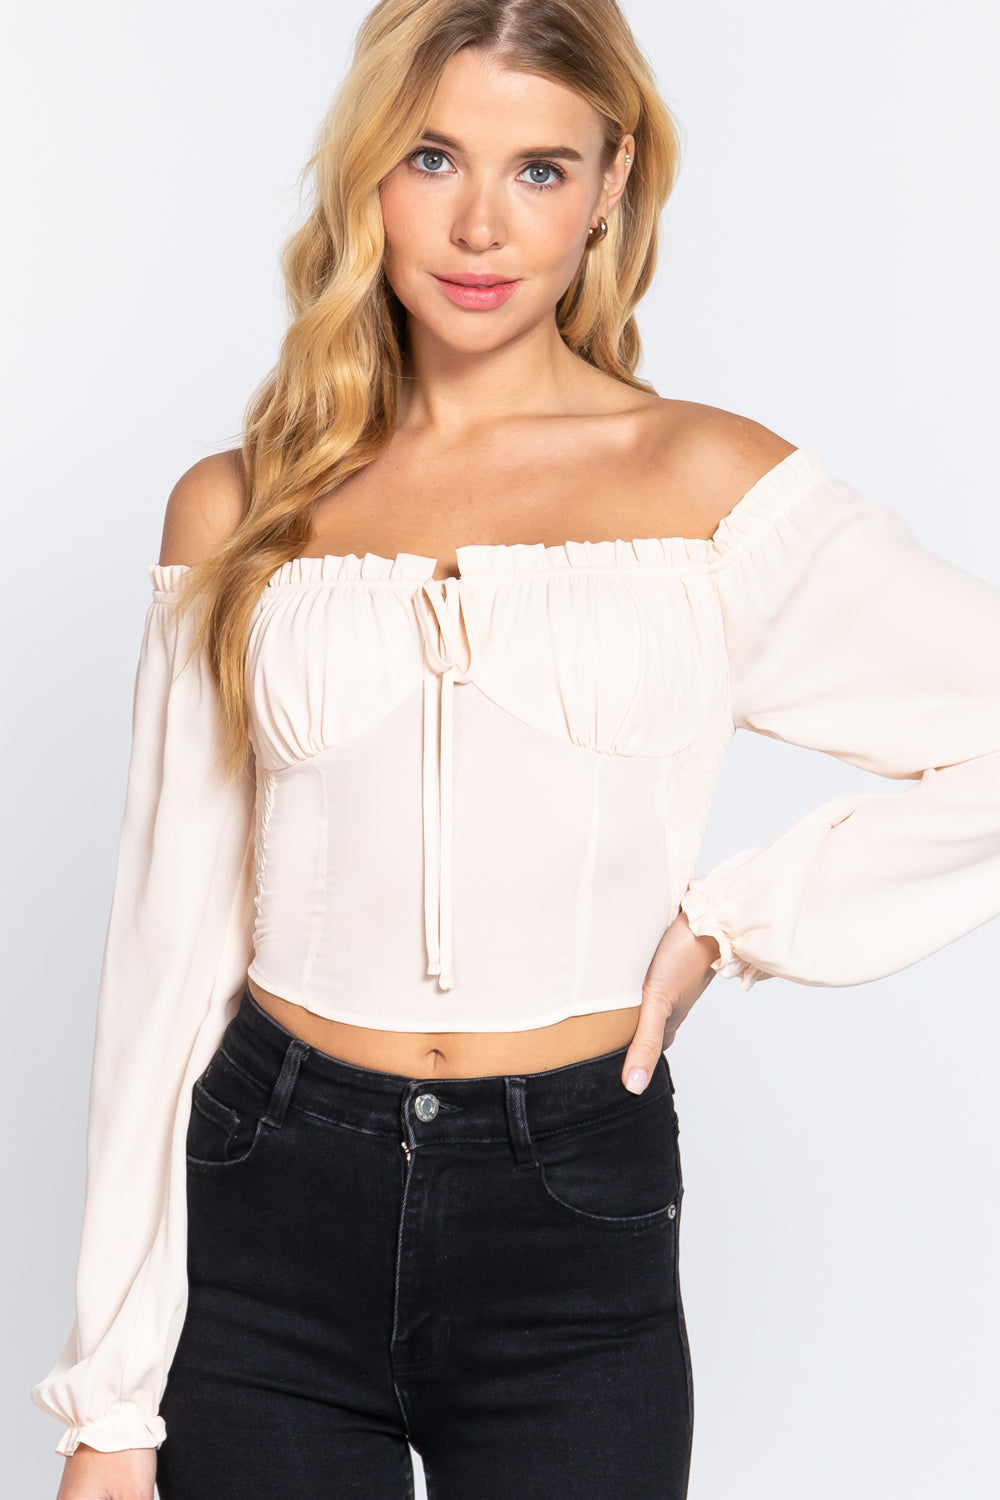 Off Shoulder Smocking Woven Top - Love It Clothing